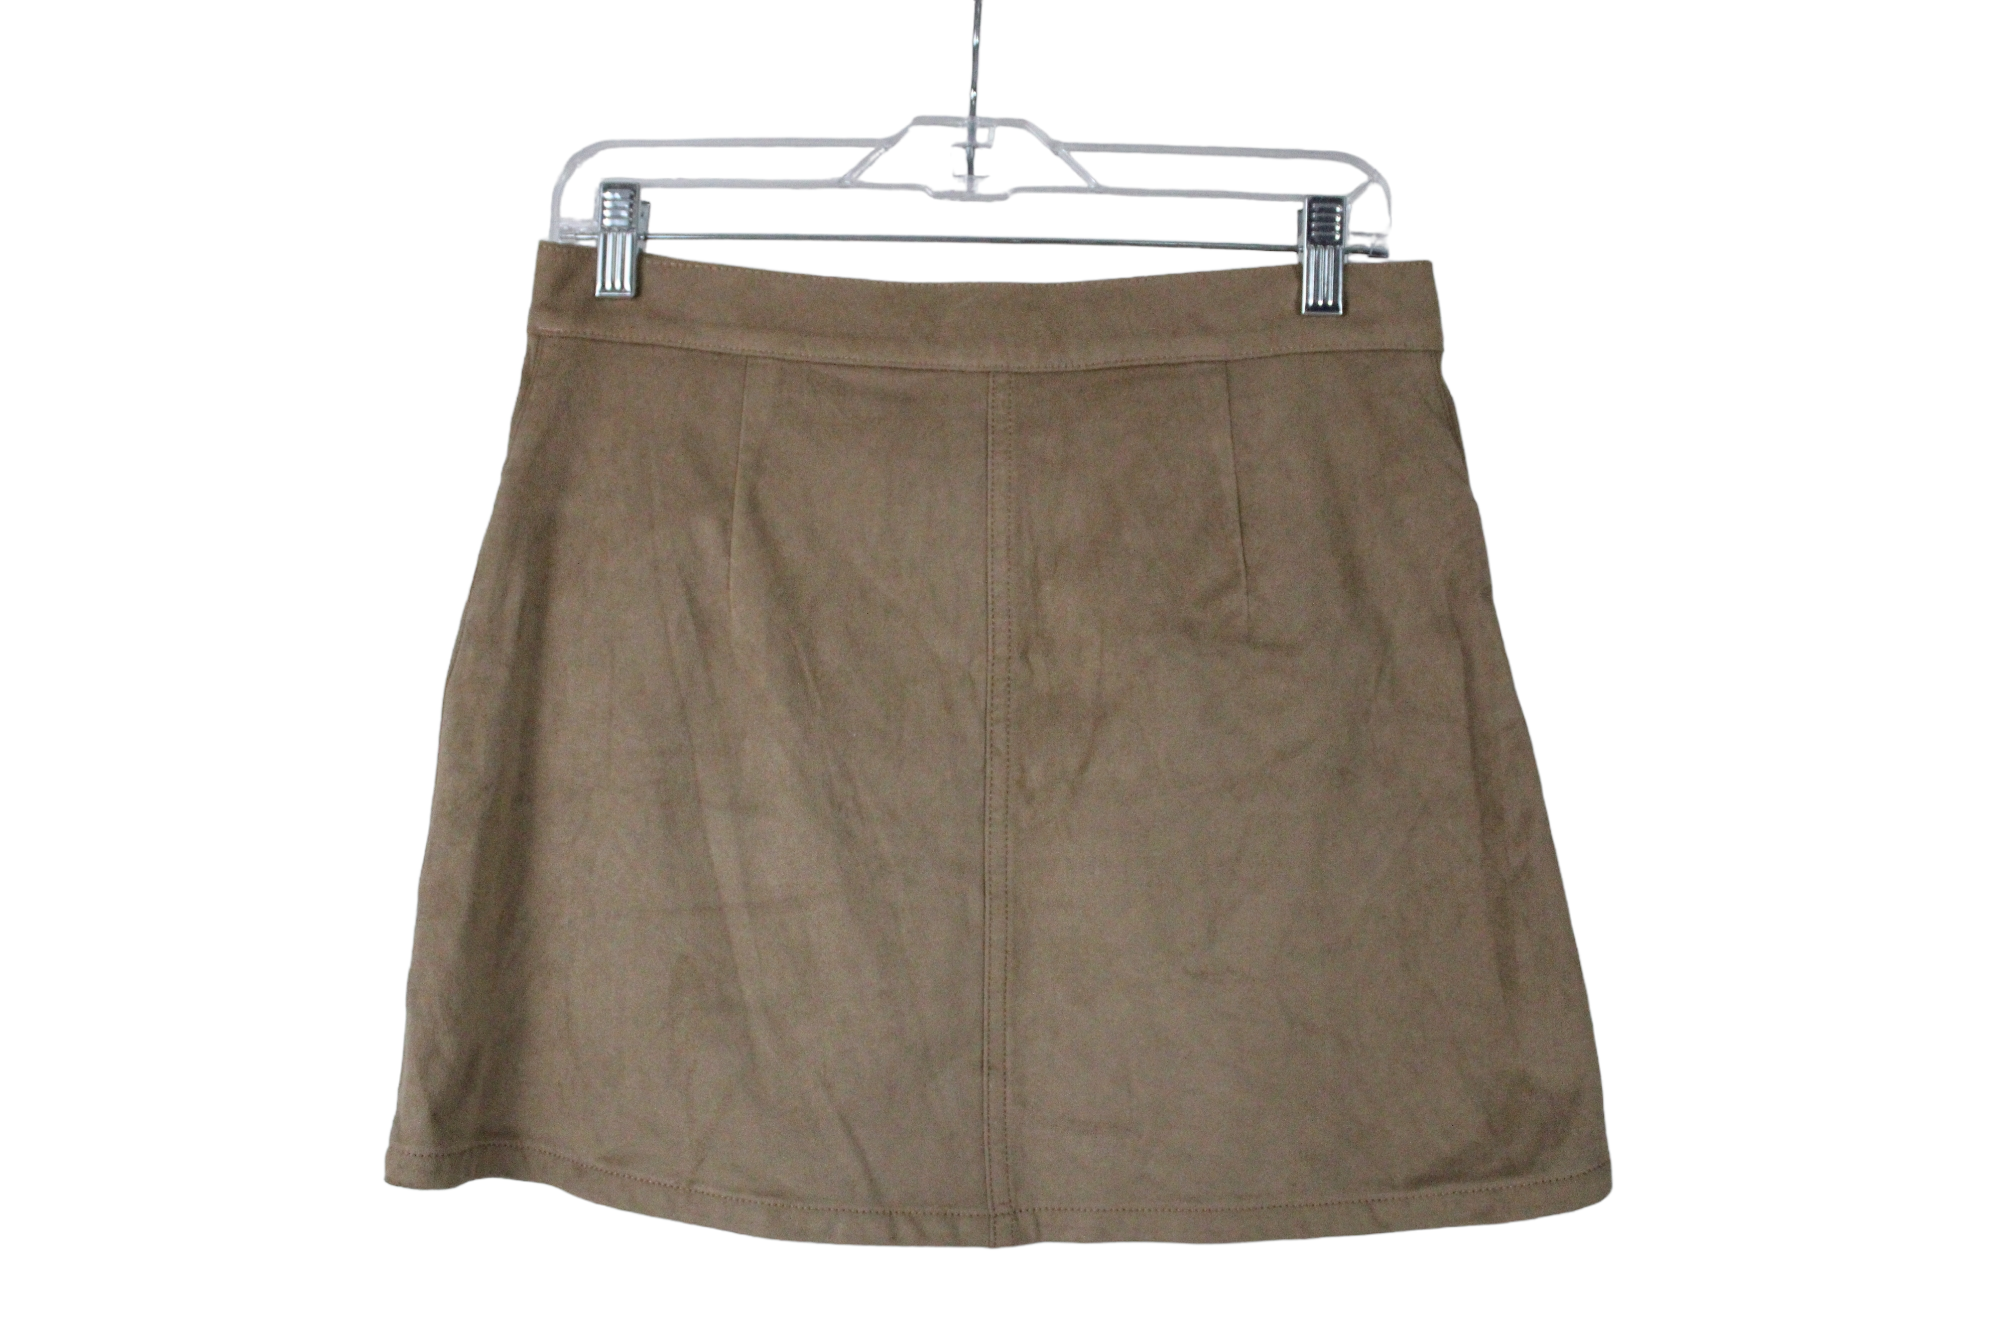 Express Tan Suede Finish Skirts | 4